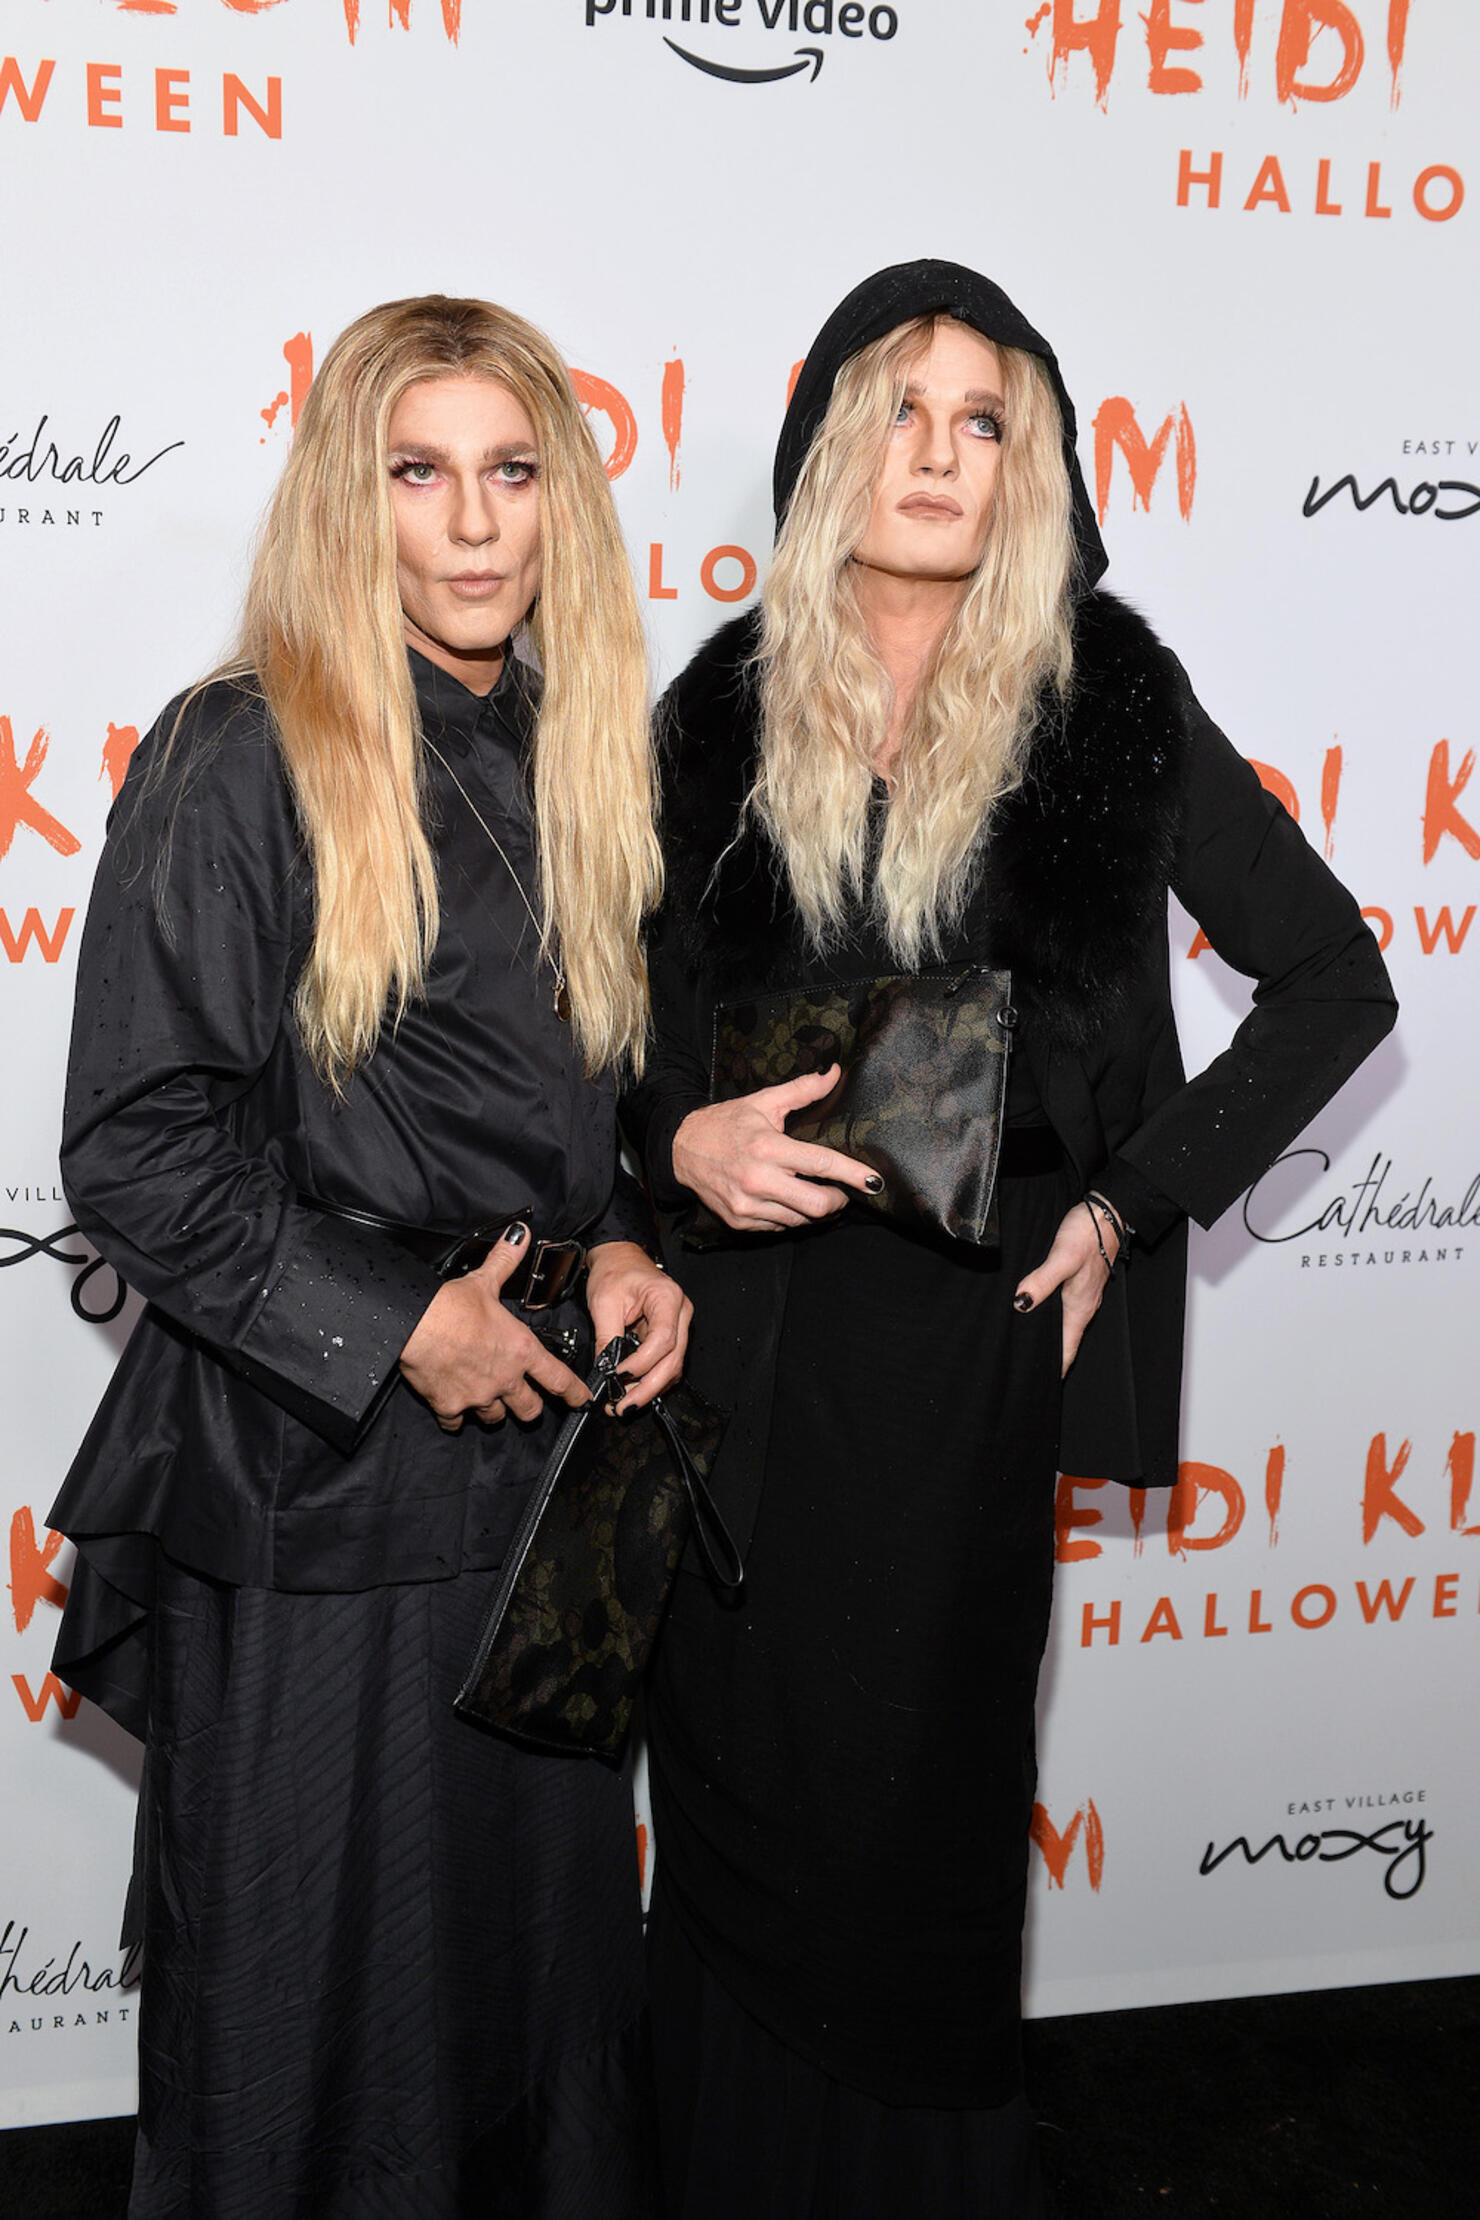 Heidi Klum's 20th Annual Halloween Party Presented By Amazon Prime Video And SVEDKA Vodka At Cath√©drale New York - Arrivals